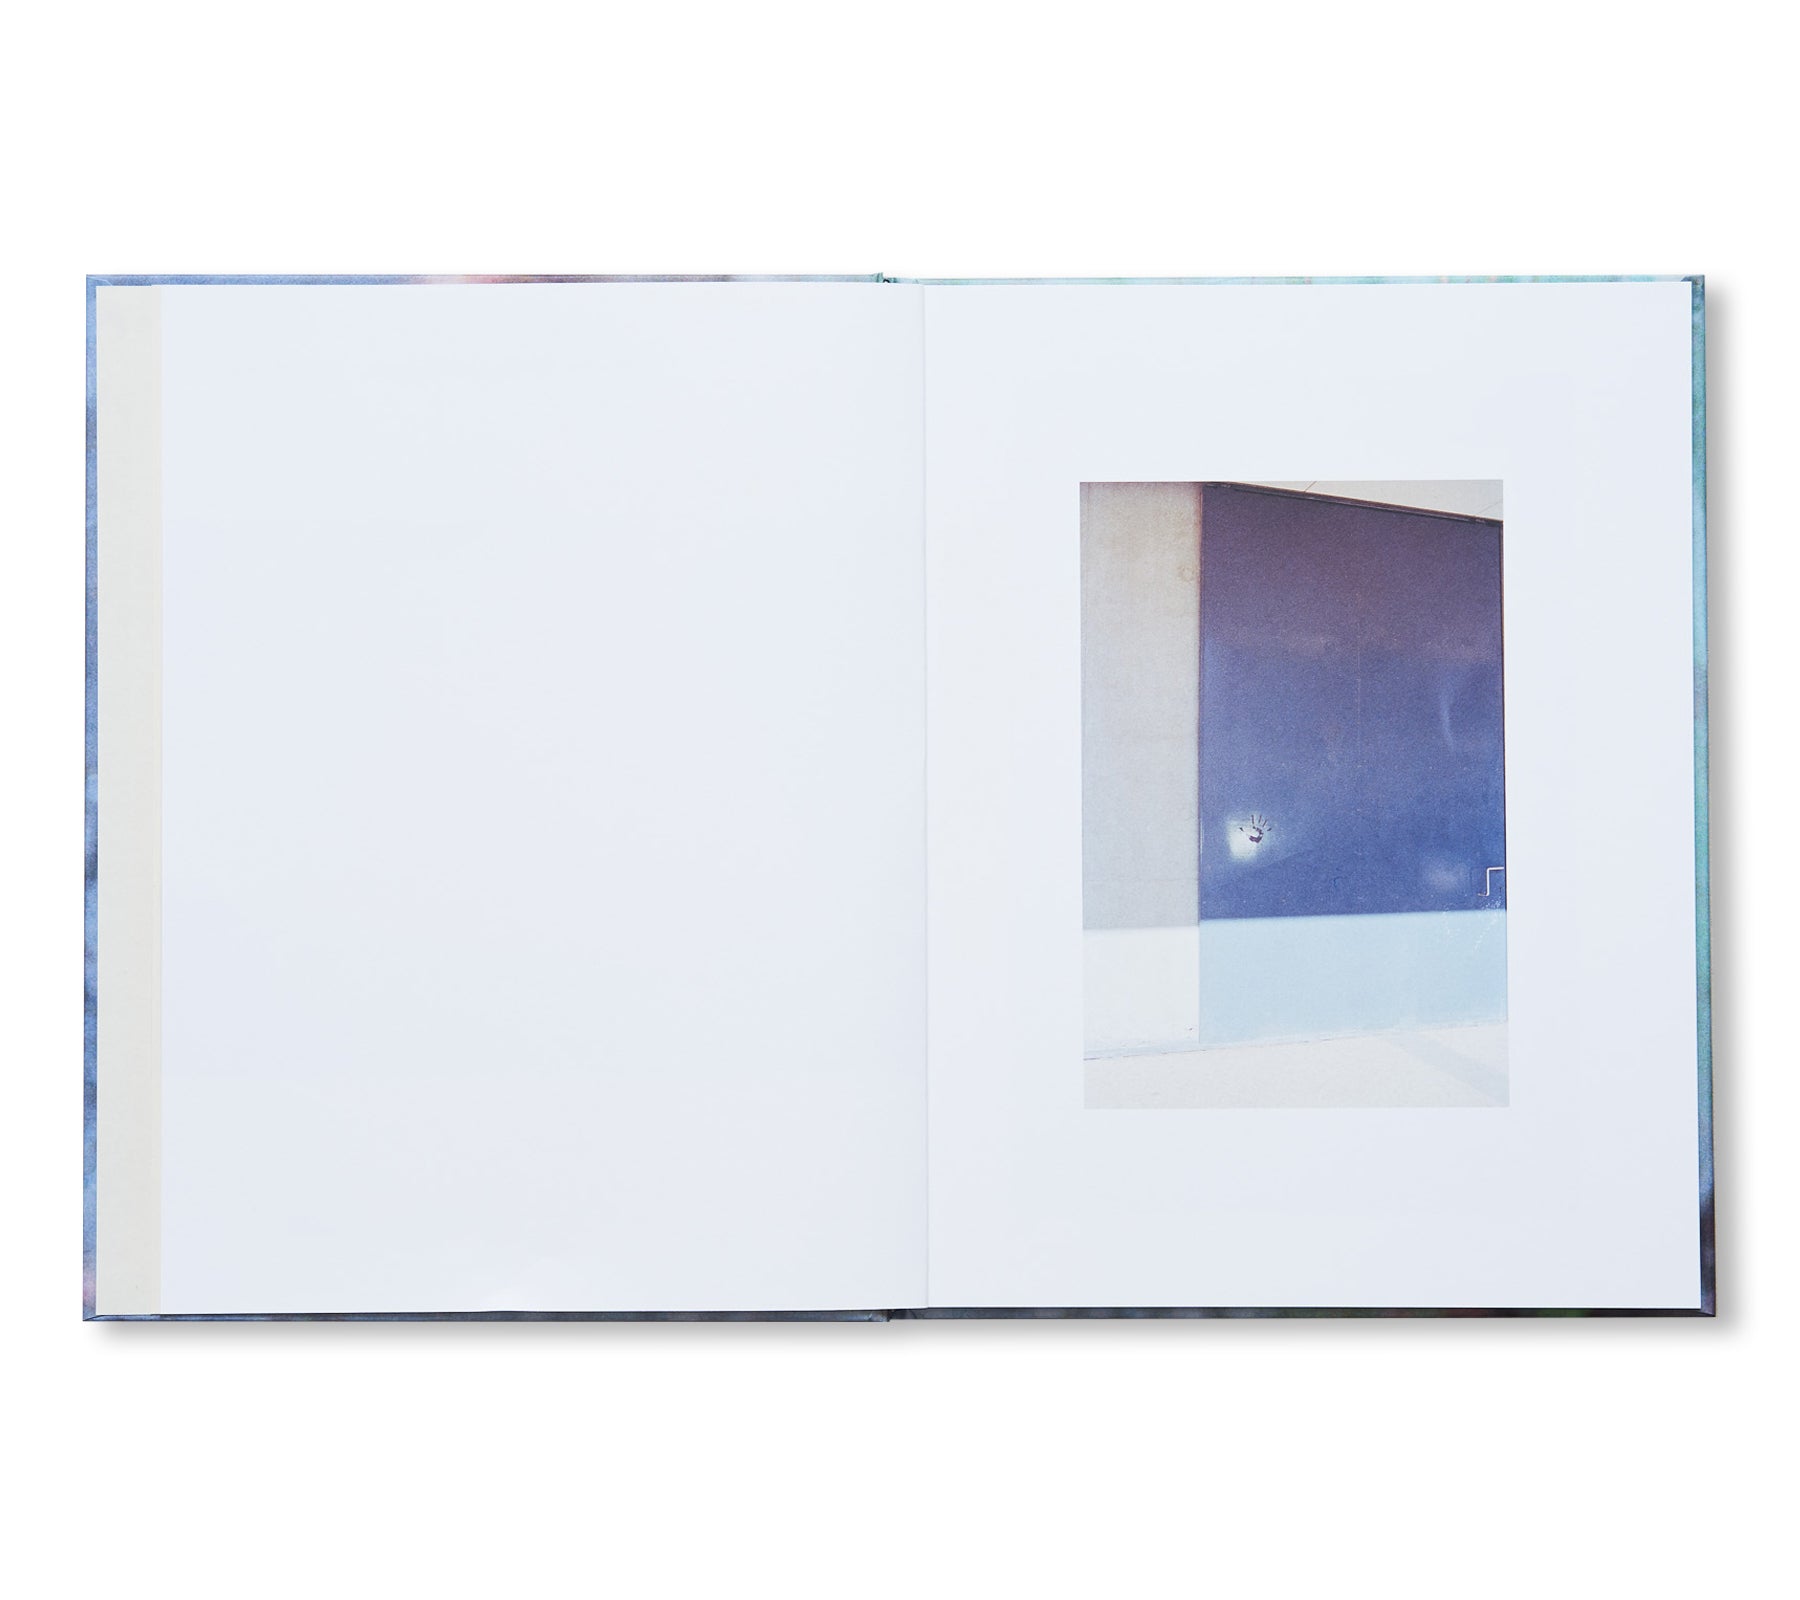 NOTES ON ORDINARY SPACES by Ola Rindal – twelvebooks